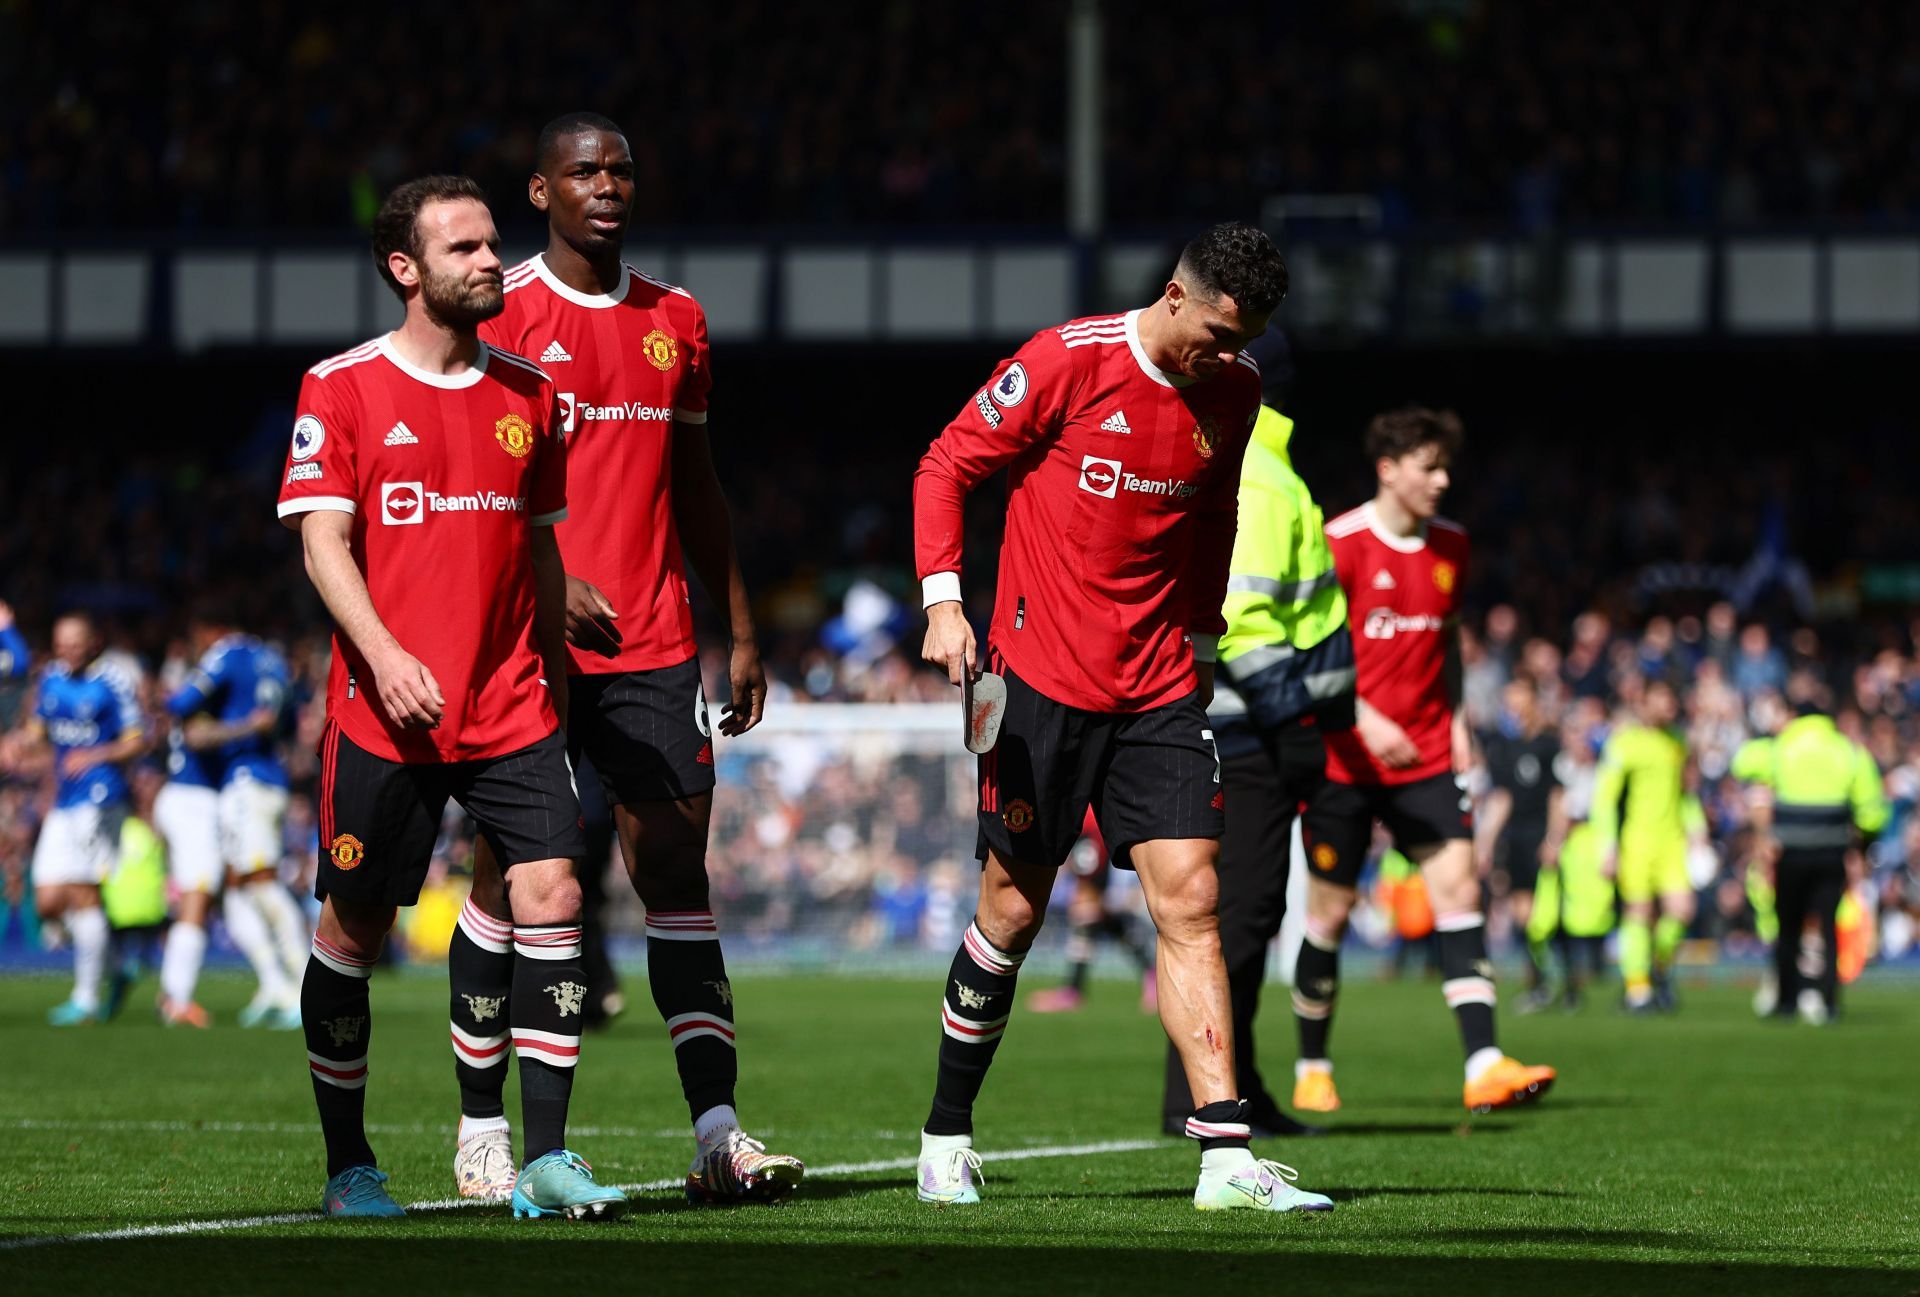 Manchester United players look dejected after the loss.